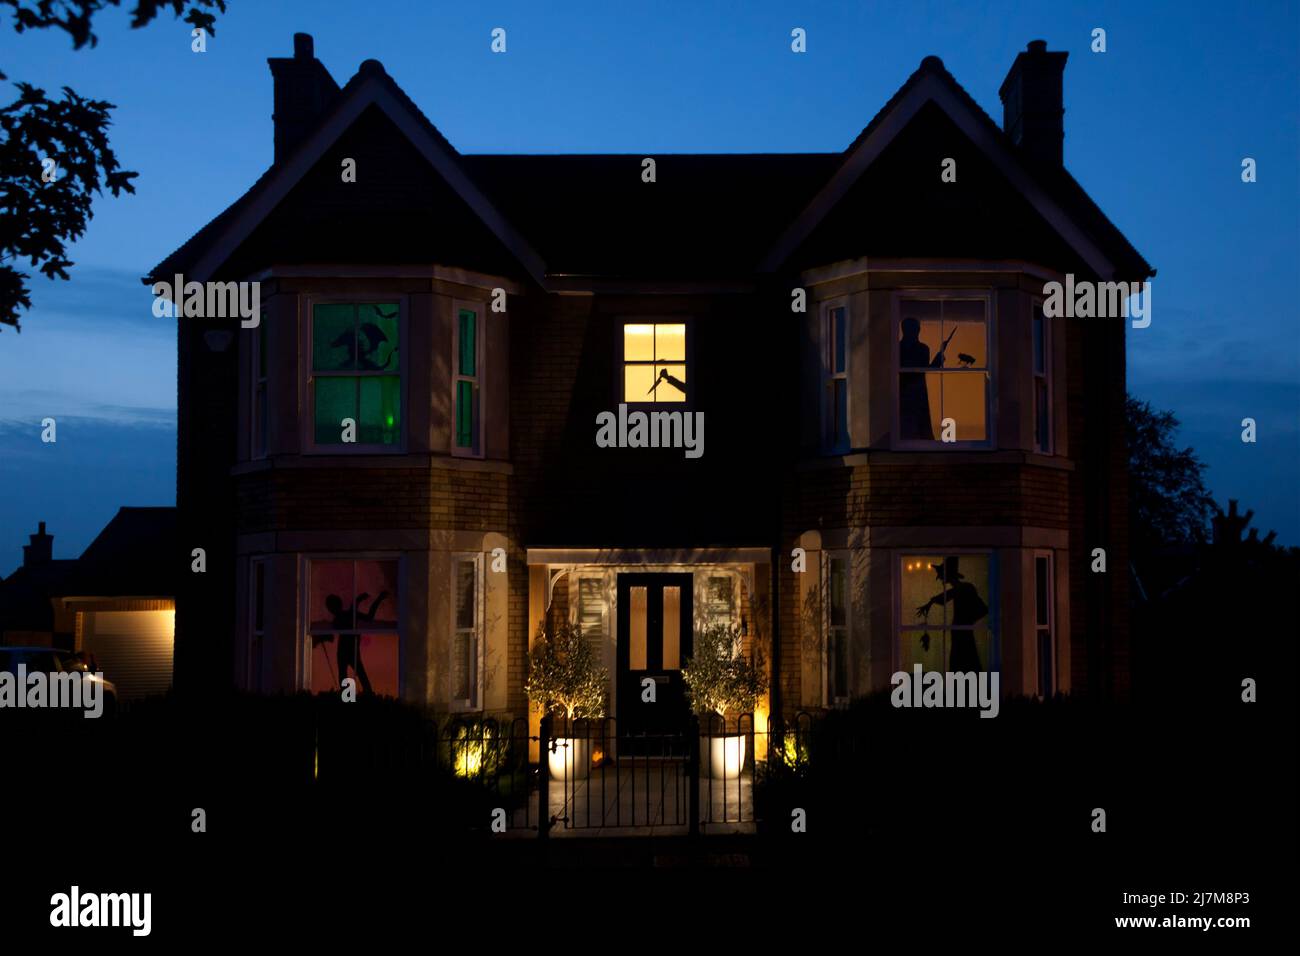 A house with spooky window silhouettes in Fairfield, Bedfordshire, UK which has become well known for its Halloween decorations. Stock Photo